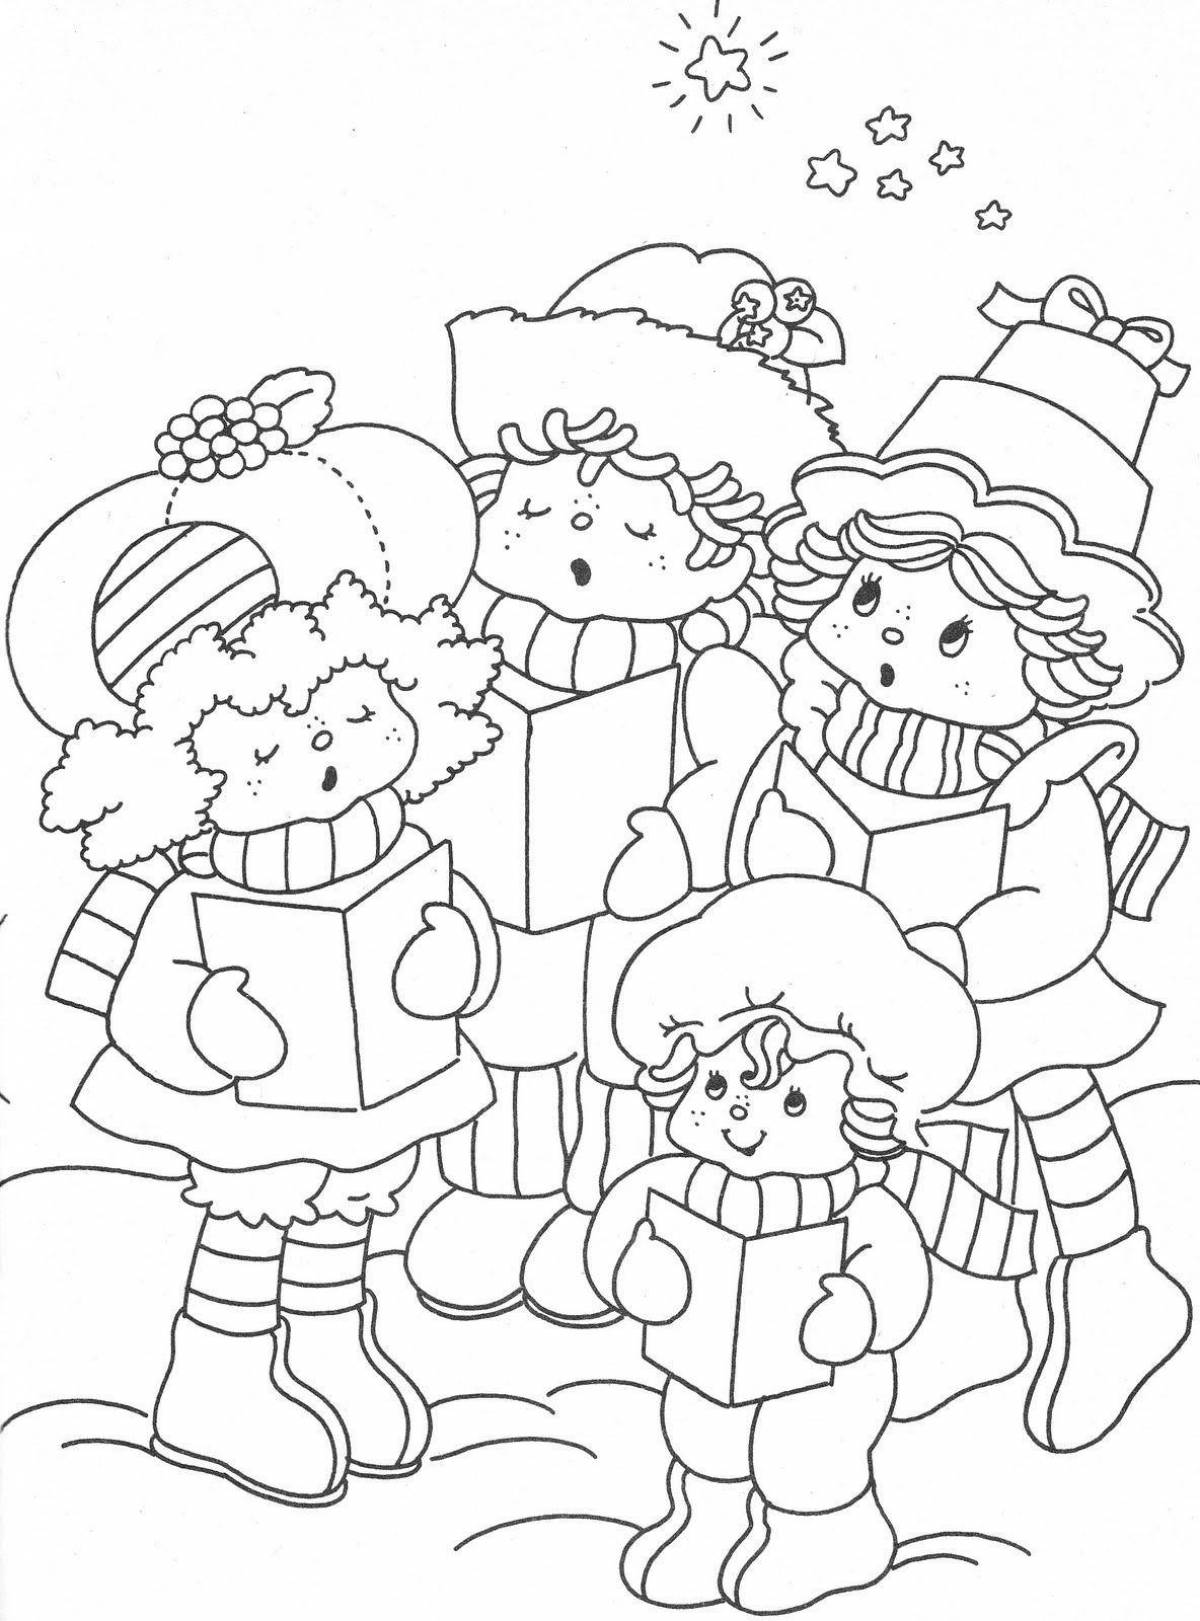 Great carol coloring pages for kids 6 7